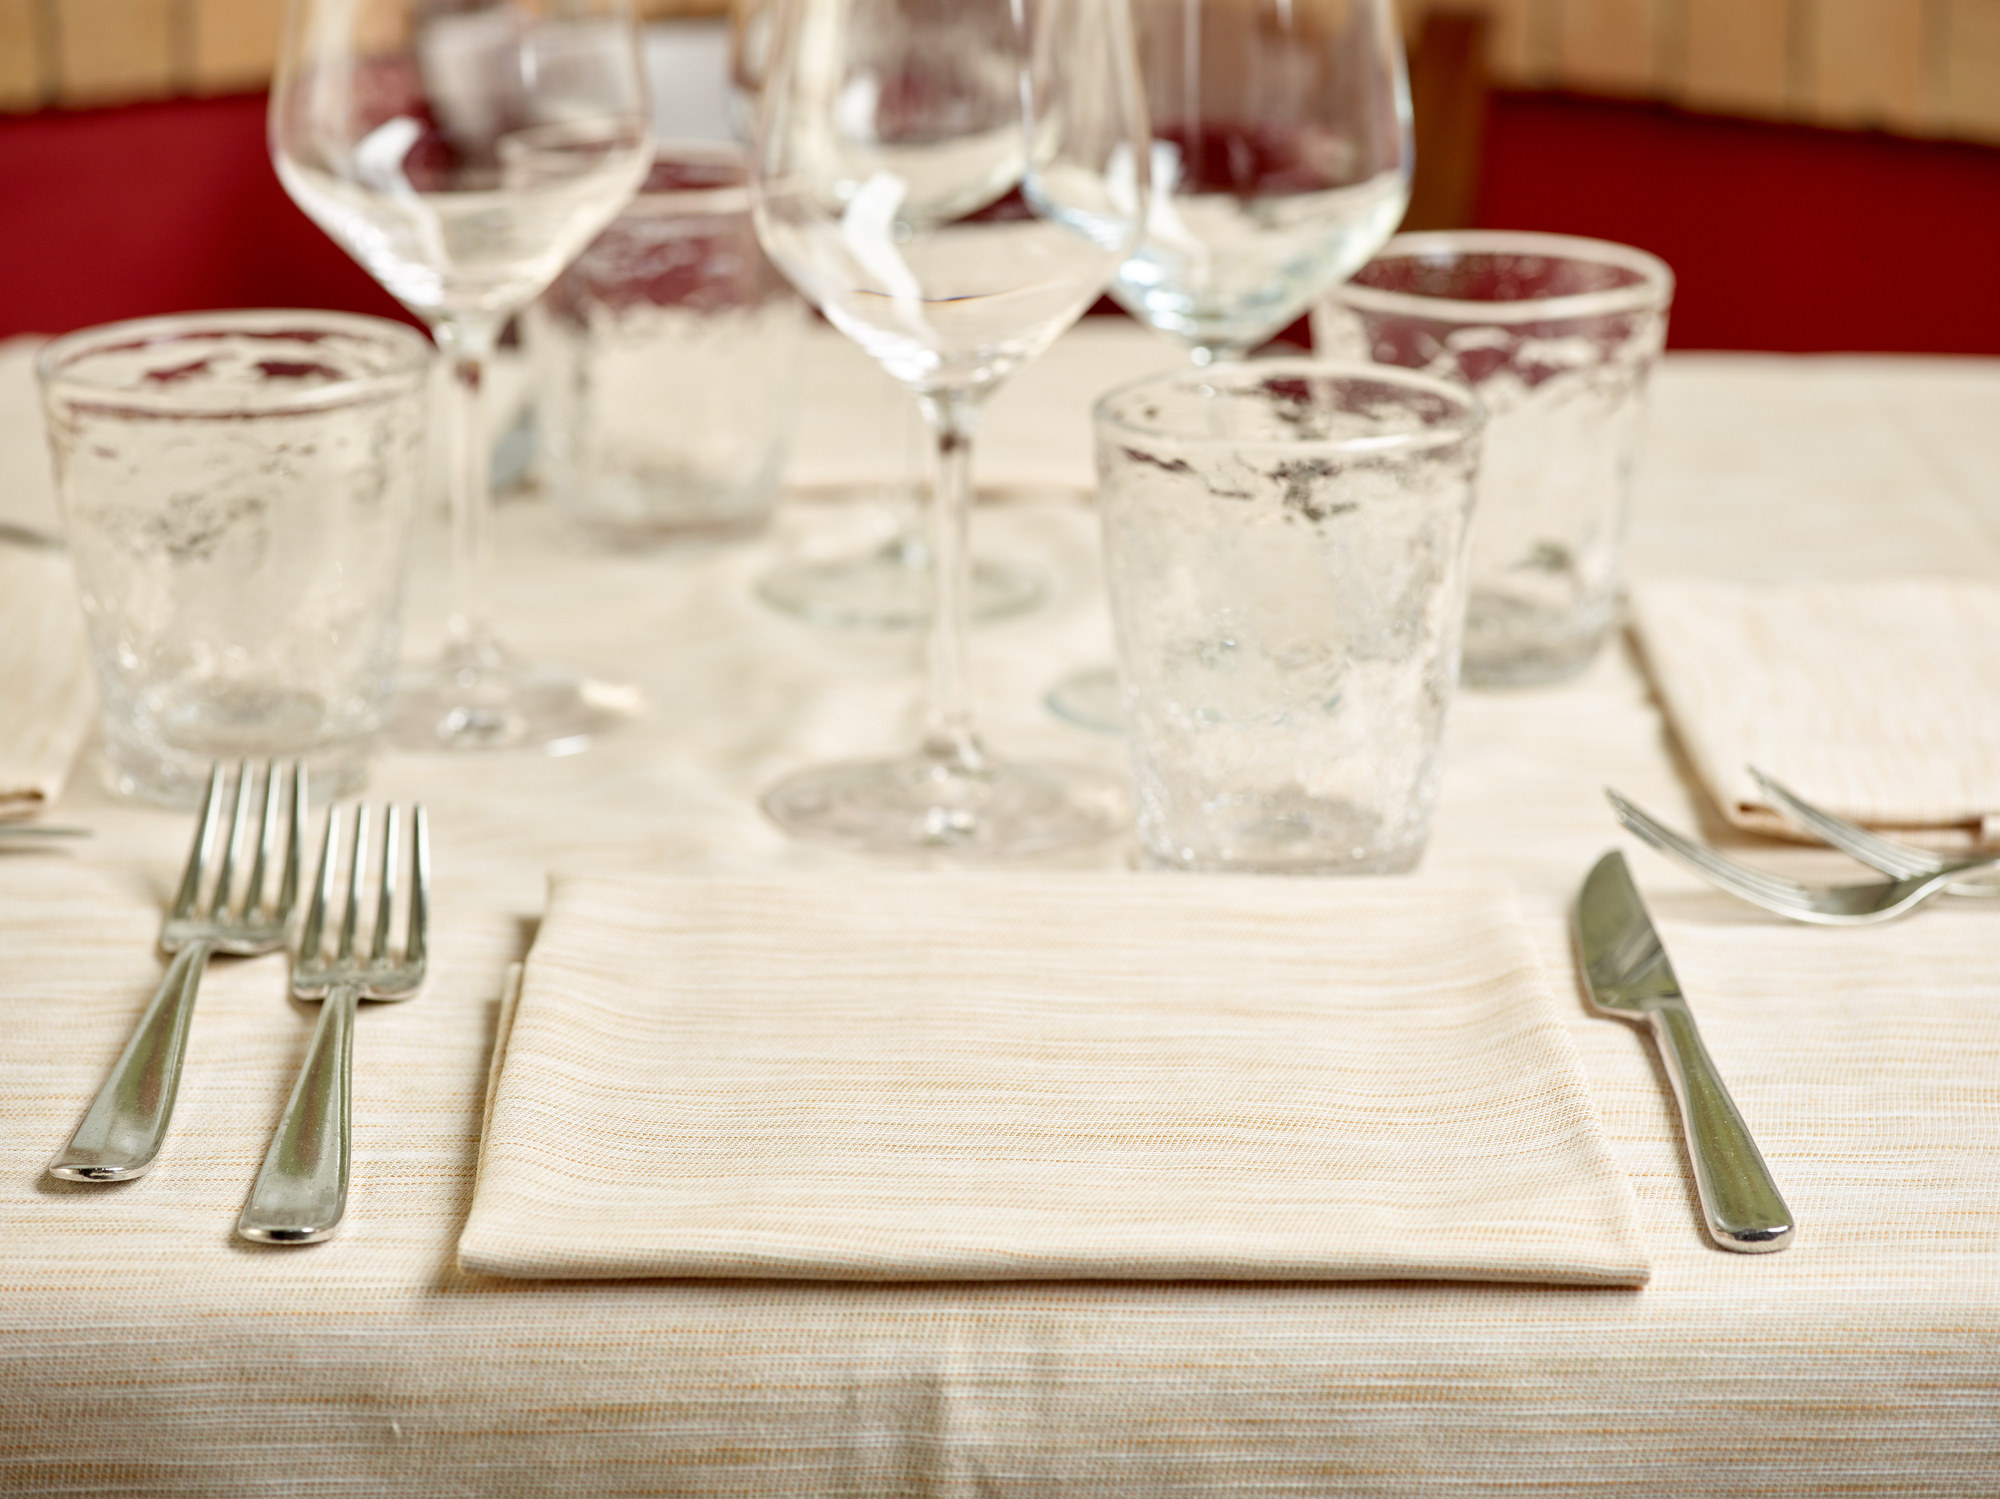 Elegant table setting with glassware and utensils for a formal dining experience